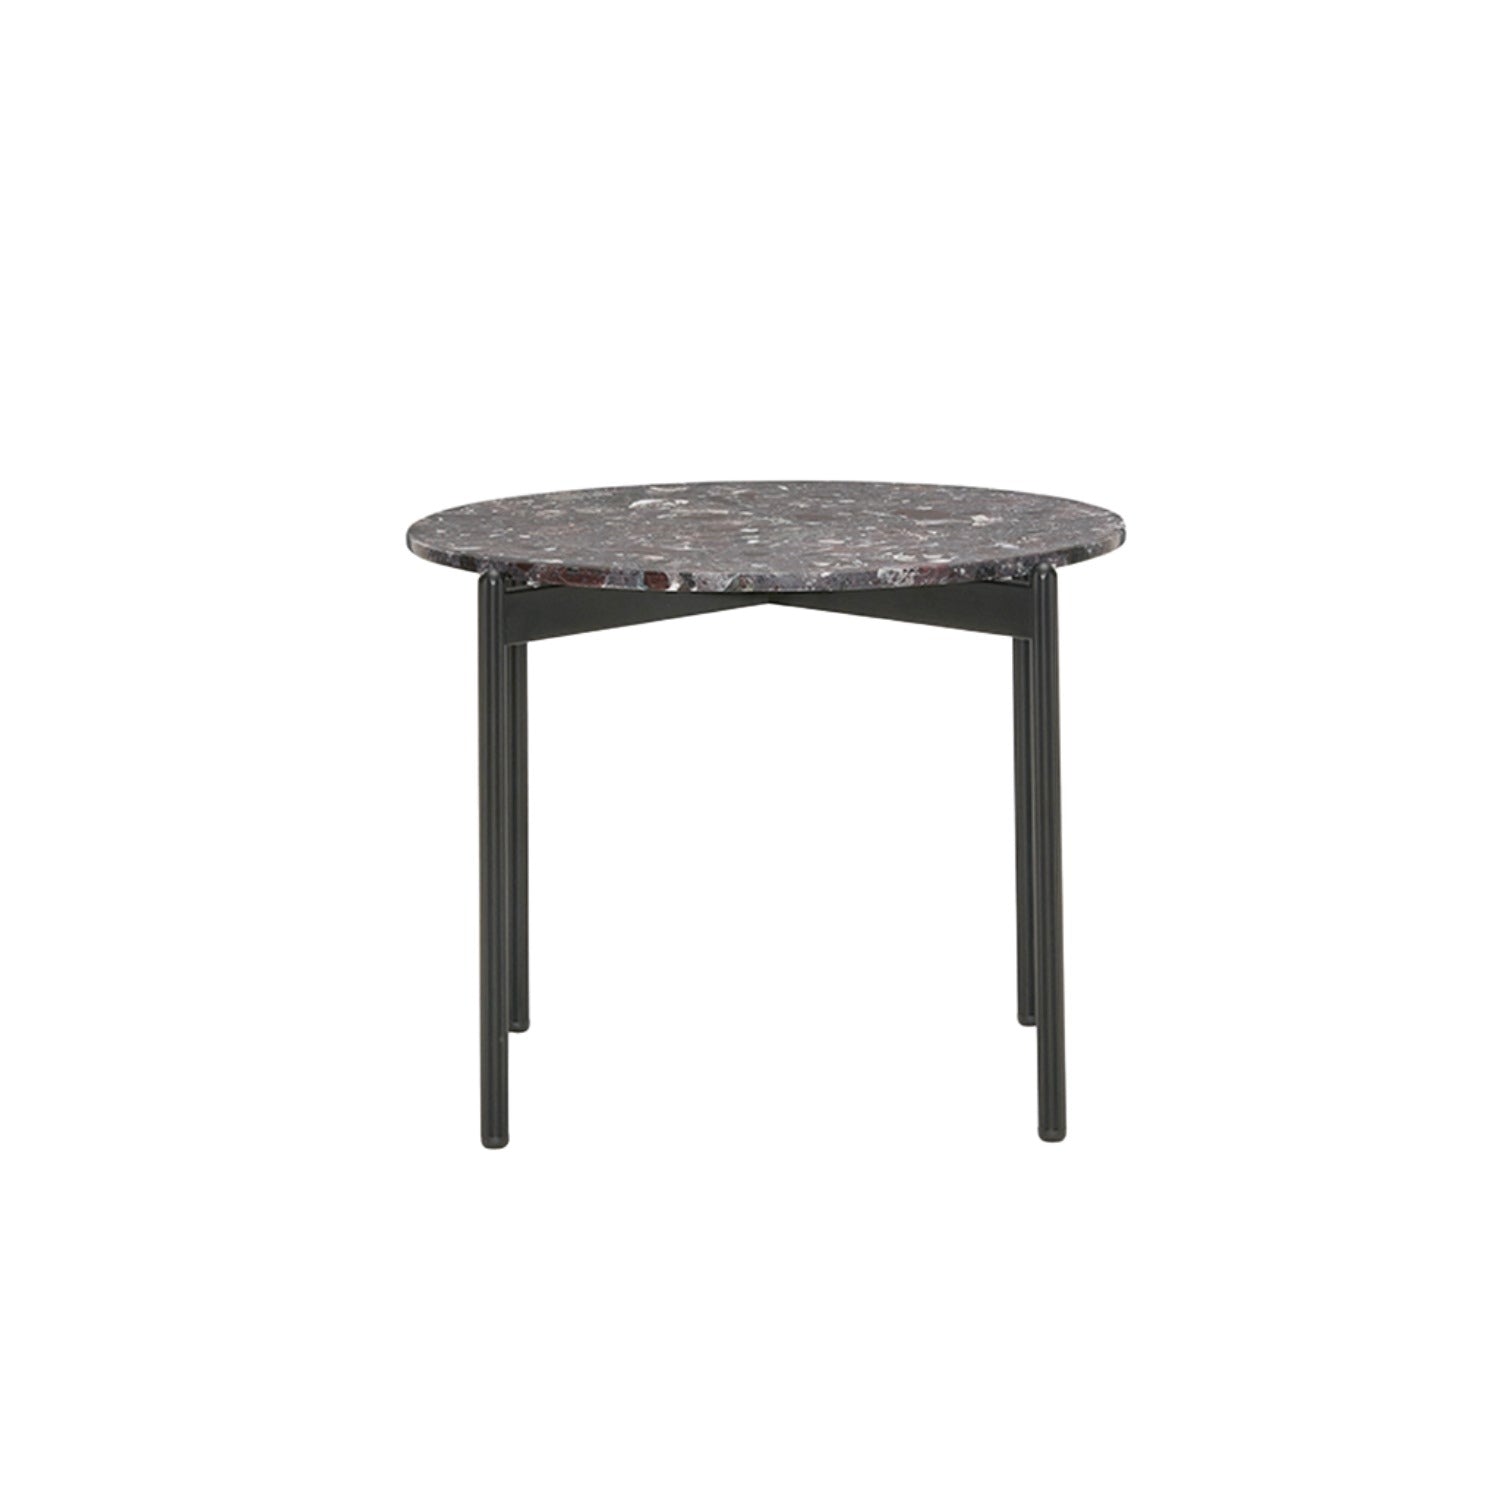 Pedrali Blume round coffee side table in composite marble and black legs